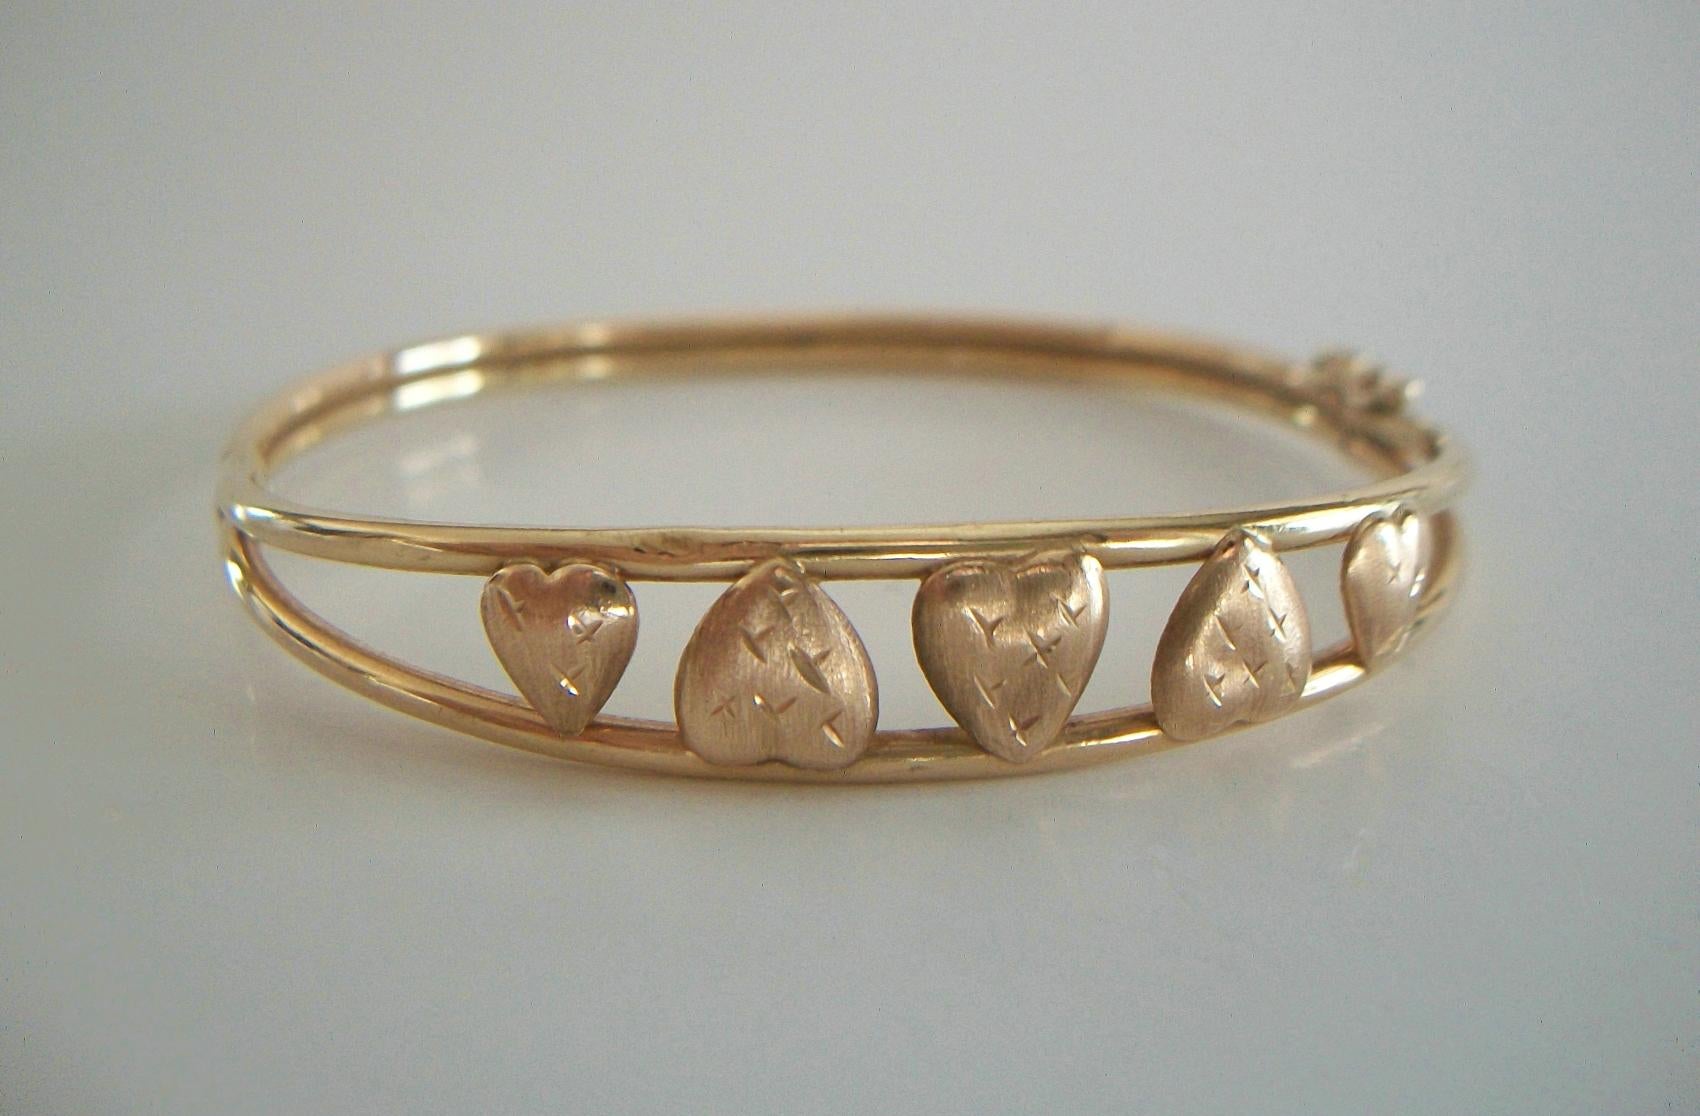 A. A. J. - Vintage 10K yellow gold bangle bracelet with five applied hearts - each heart with stamped star detail - hinged assembly with tongue & groove clasp and double safety catch - signed on the back - U.S.A. - circa 1980's.

Excellent vintage